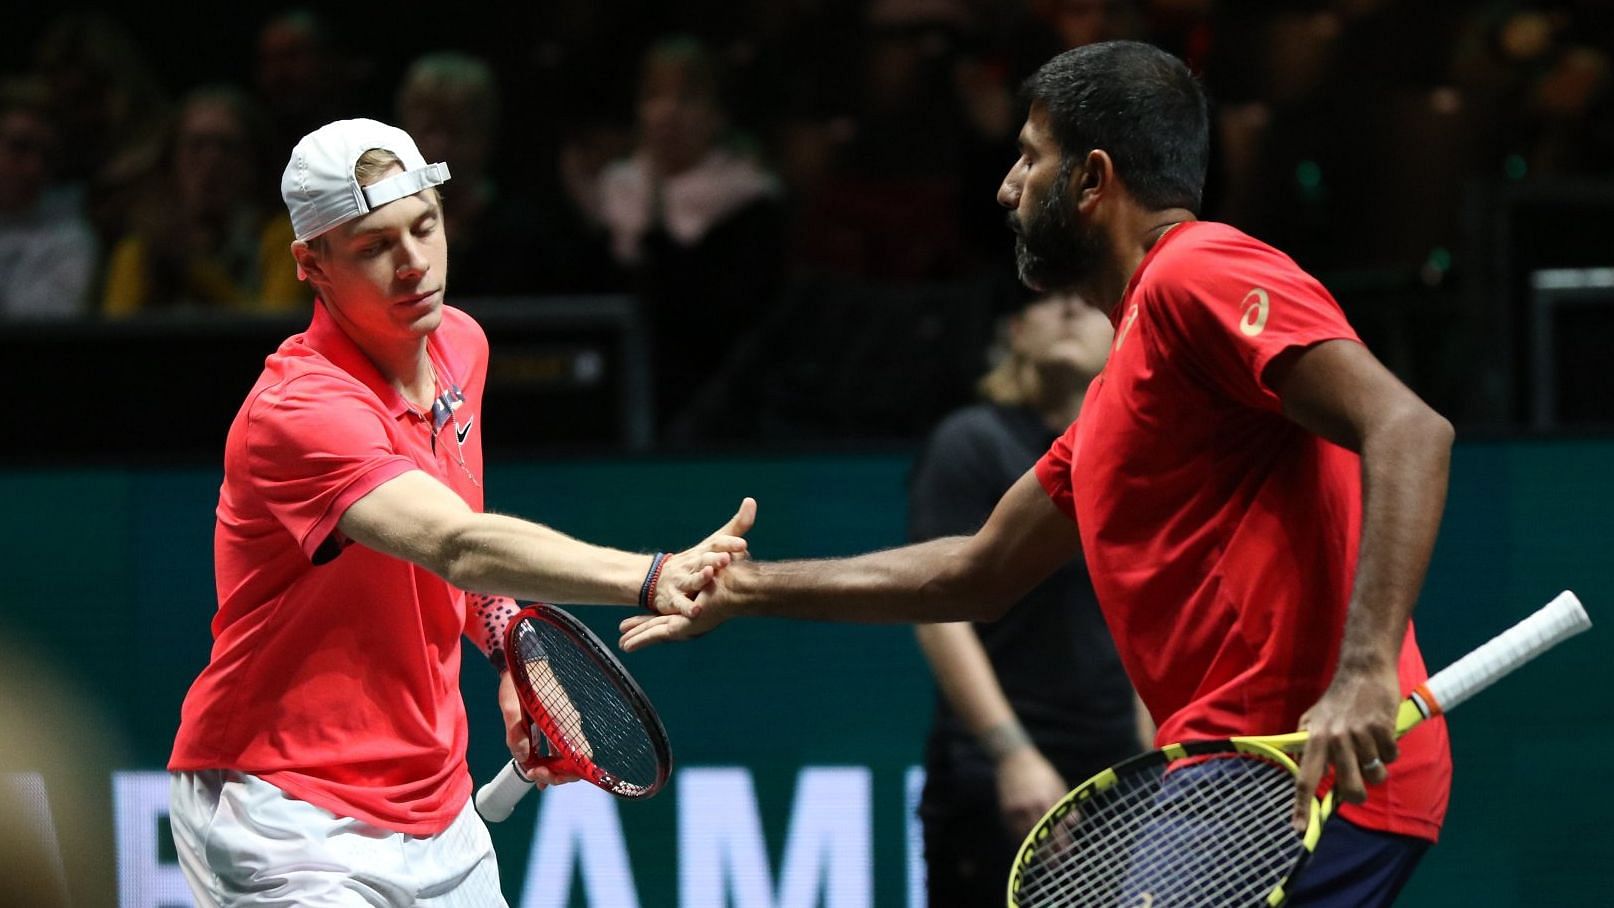 The Indo-Canadian pair registered a 6-2, 3-6, 10-7 victory in 74 minutes.